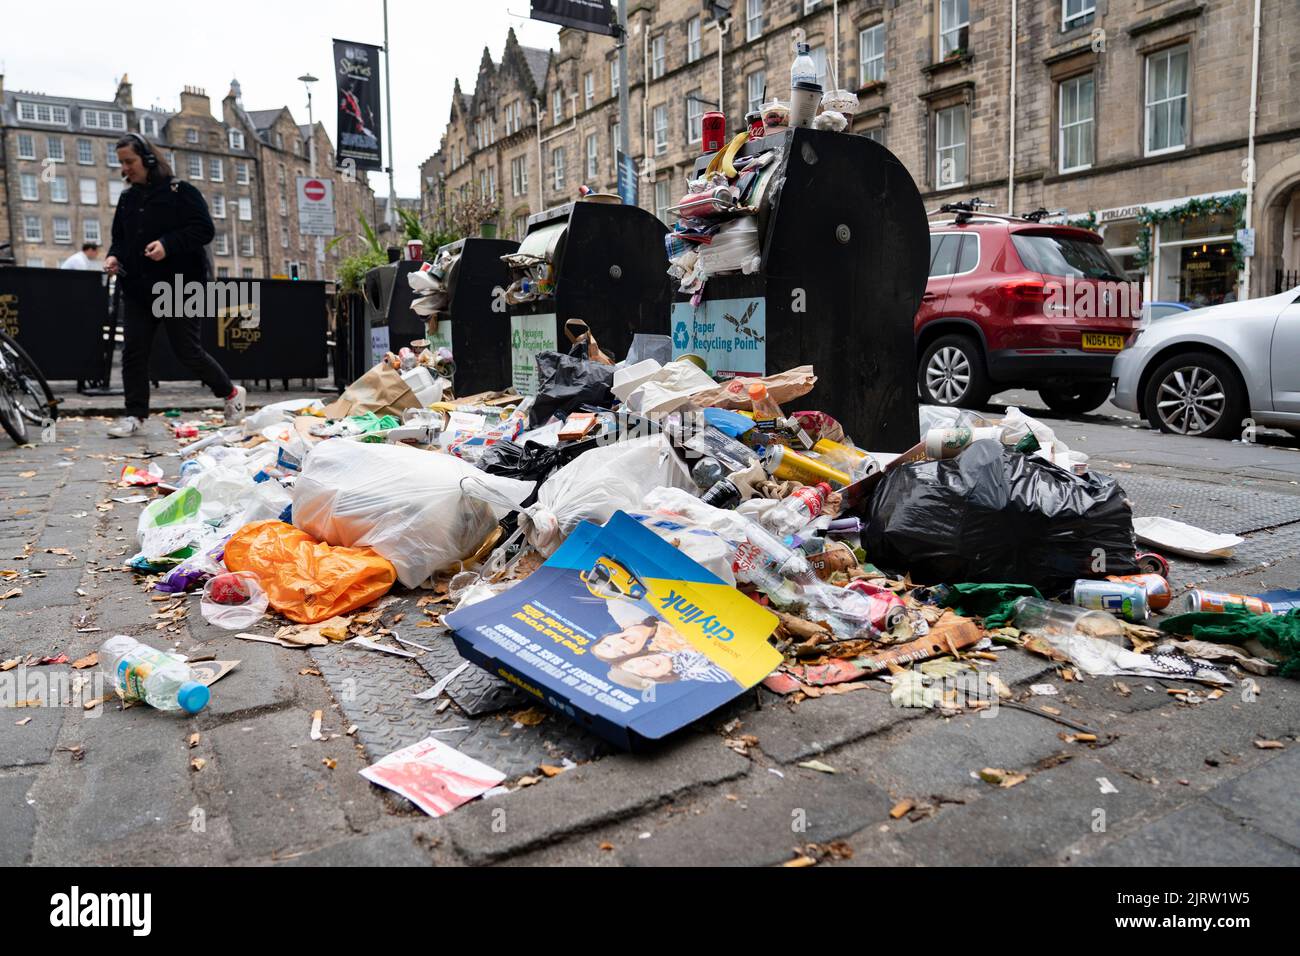 Edinburgh, Scotland, UK. 26th August 2022. Rubbish is seen piled on streets and beside many overflowing bins in Edinburgh City Centre today. The Binmen’s strike continues in Edinburgh and today strikes are extended to include Glasgow, Aberdeen and Dundee. Pic Rubbish strewn around bins in Grassmarket.  Iain Masterton/Alamy Live News Stock Photo